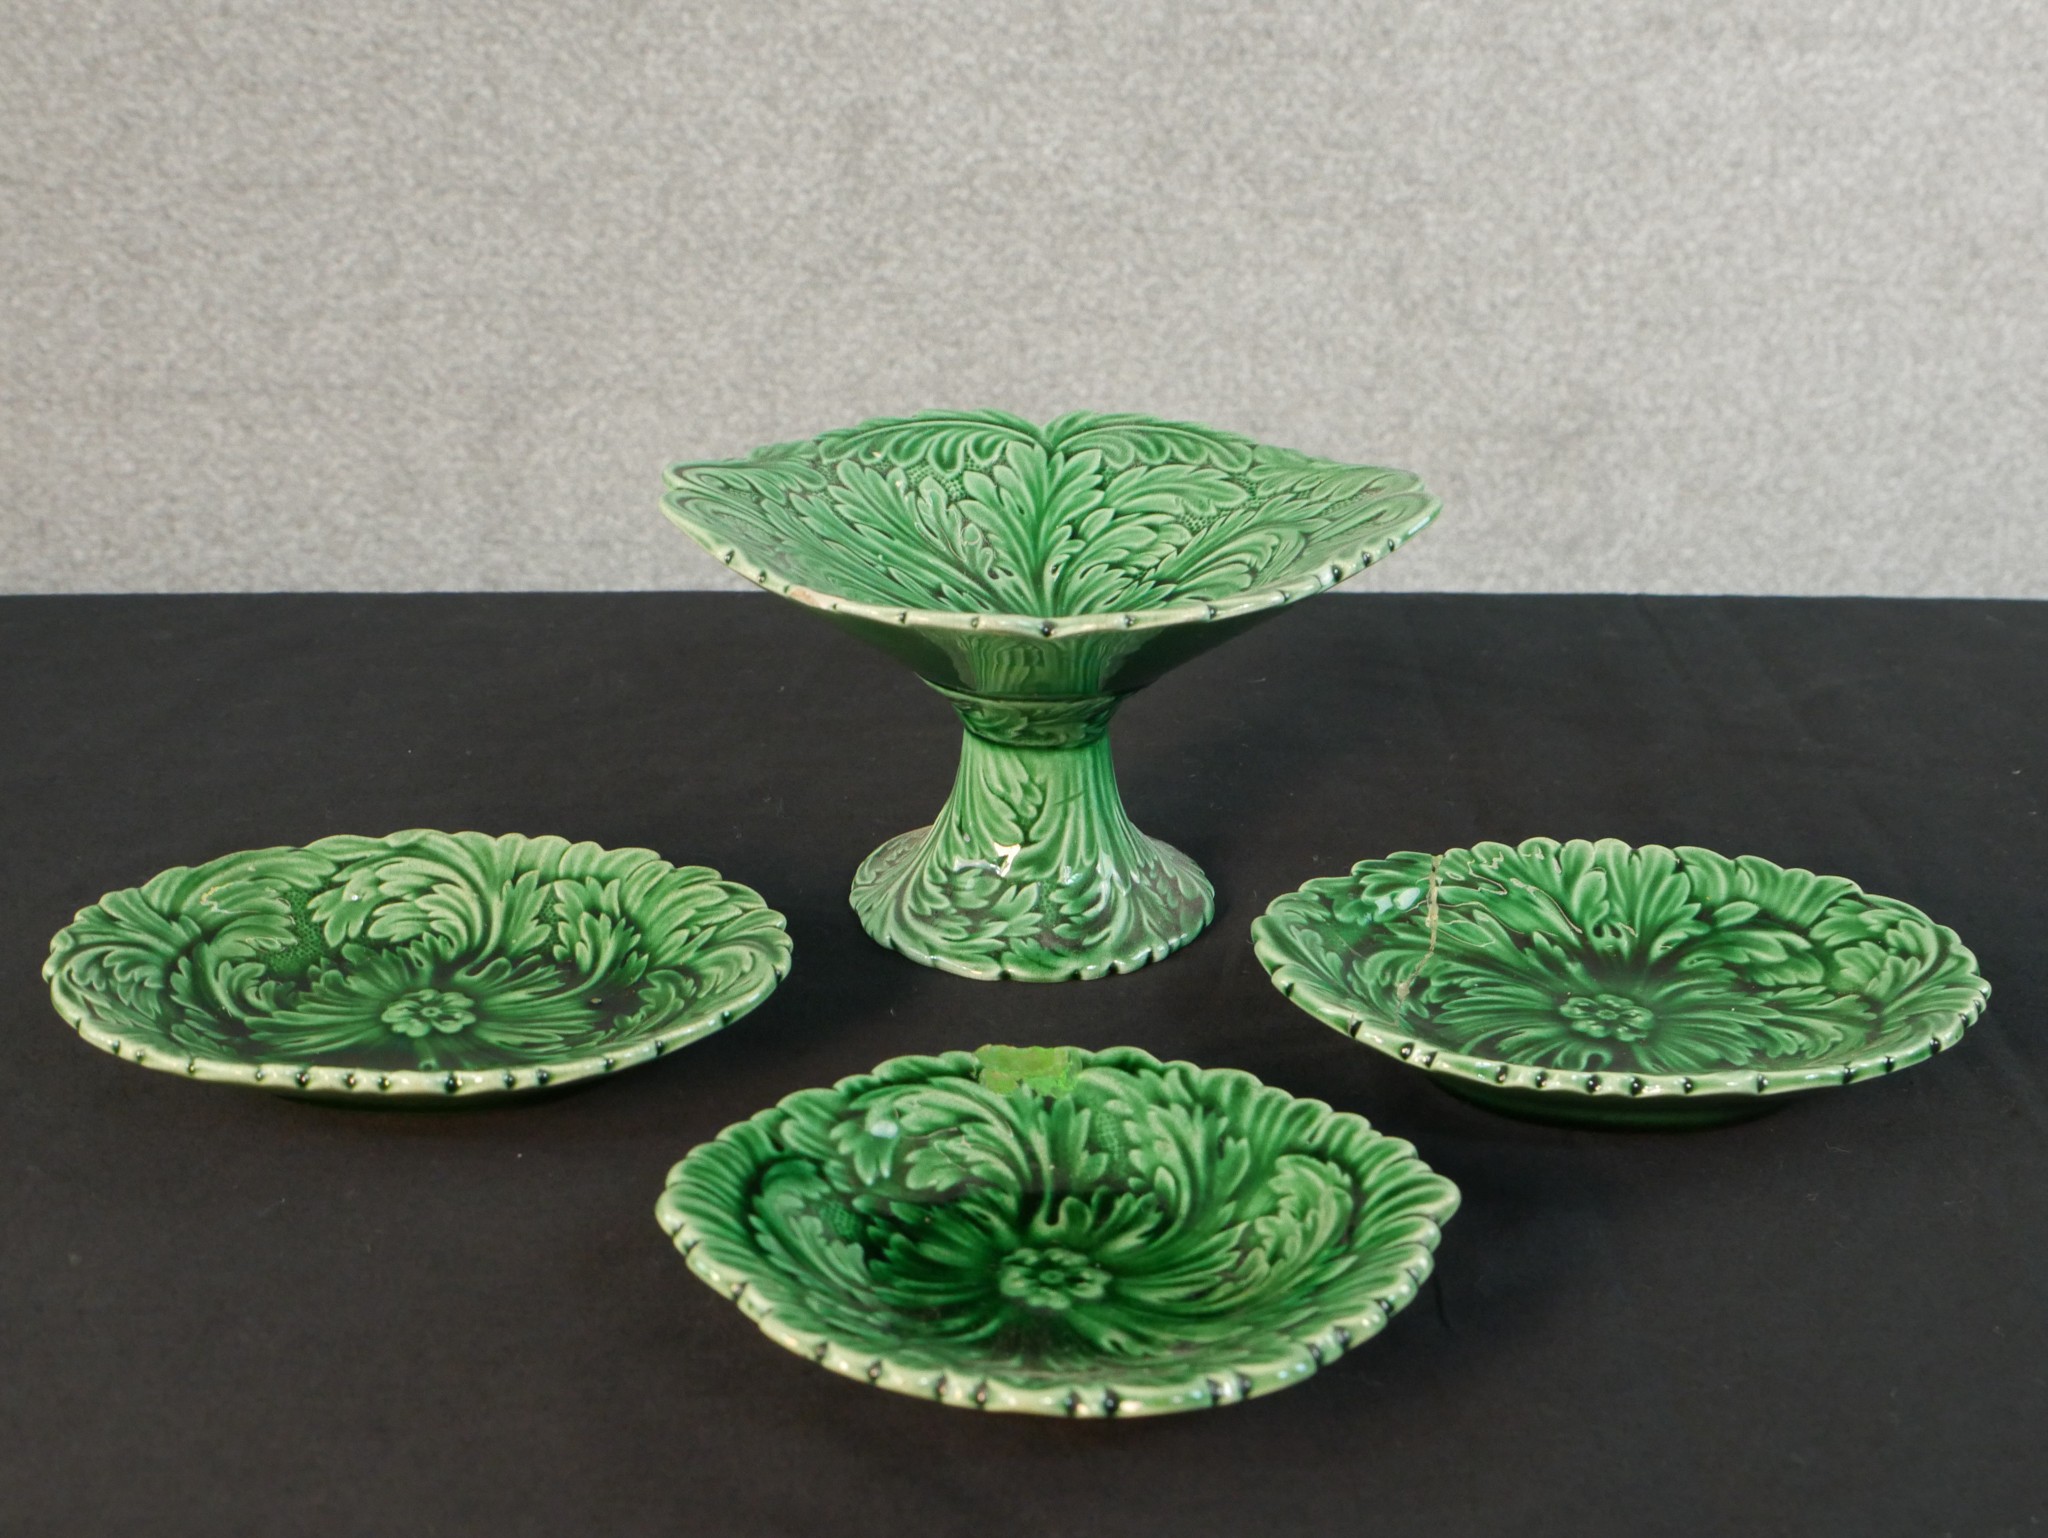 Three 19th century green glaze majolica leaf design plates along with a comport and a collection - Image 2 of 7